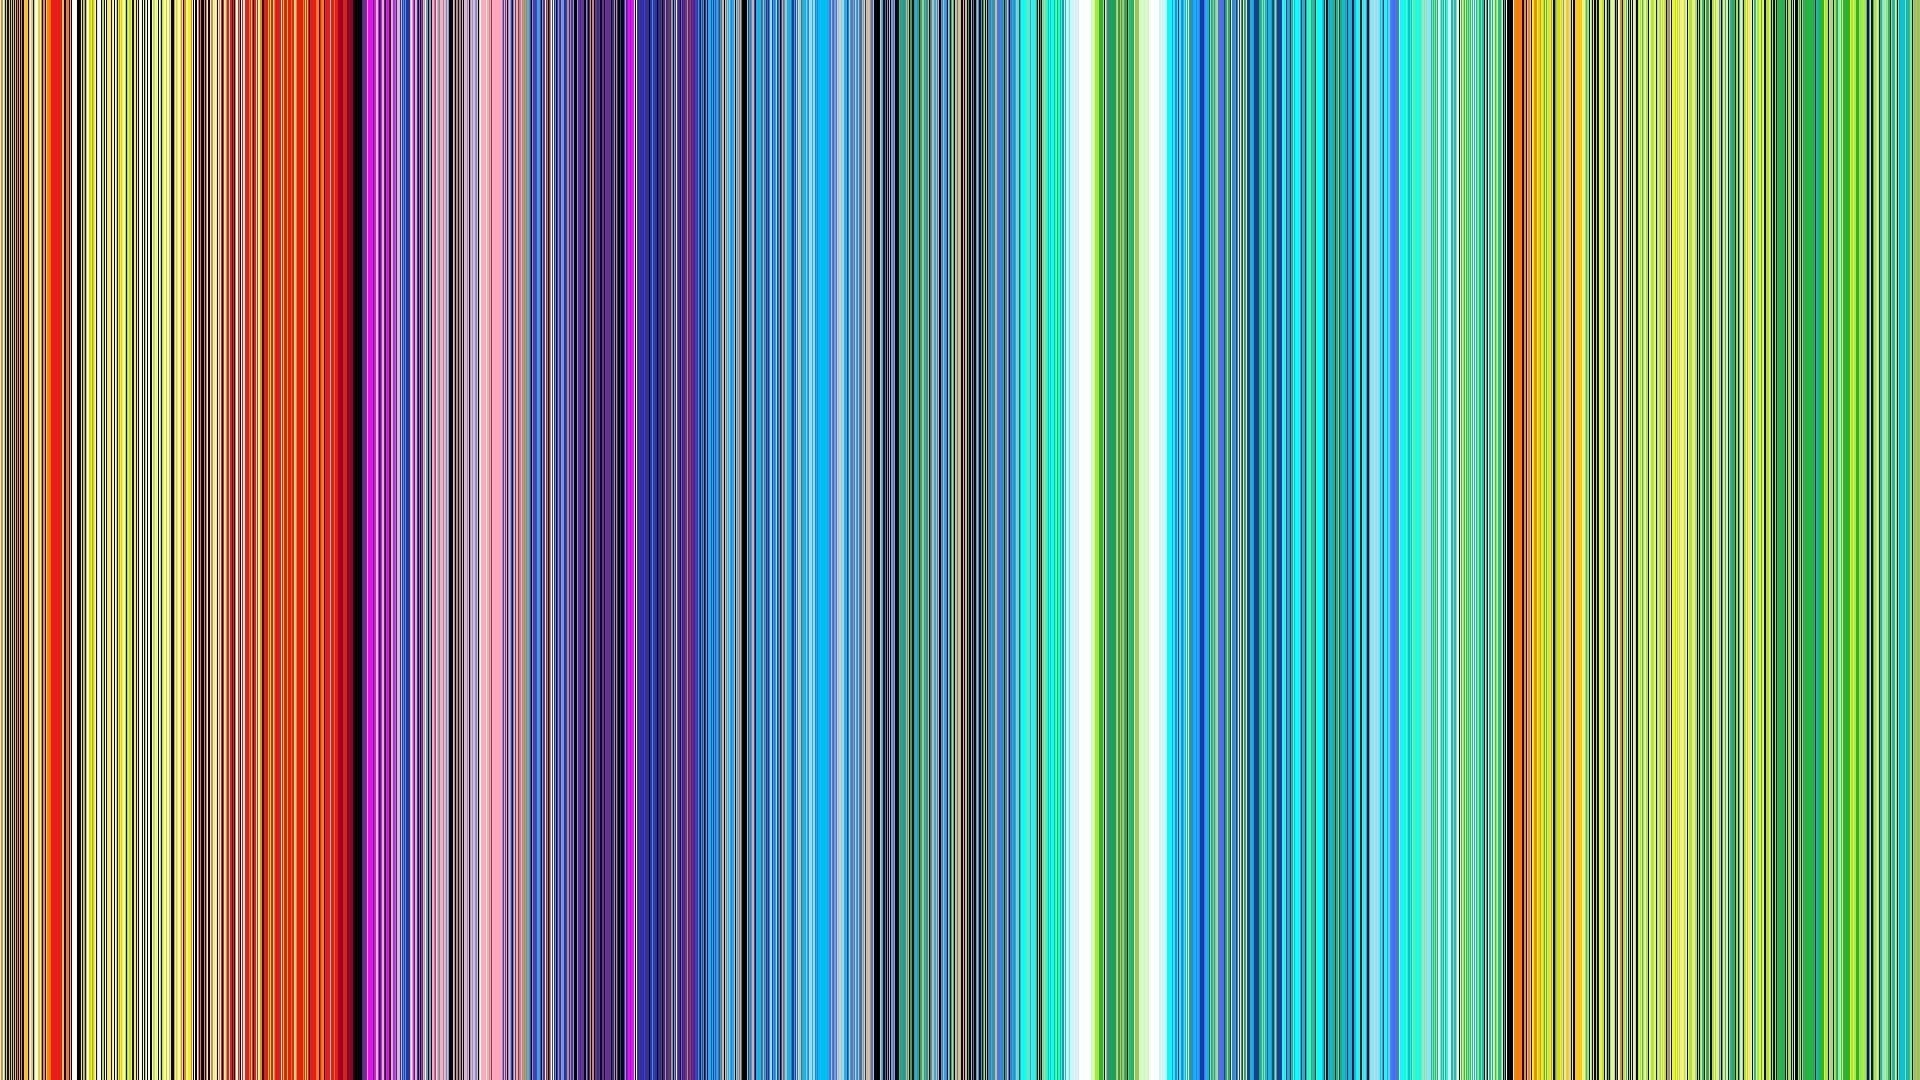 Powerpoint Free Backgrounds Vertical Colors Stripes - Colored Stripes - HD Wallpaper 